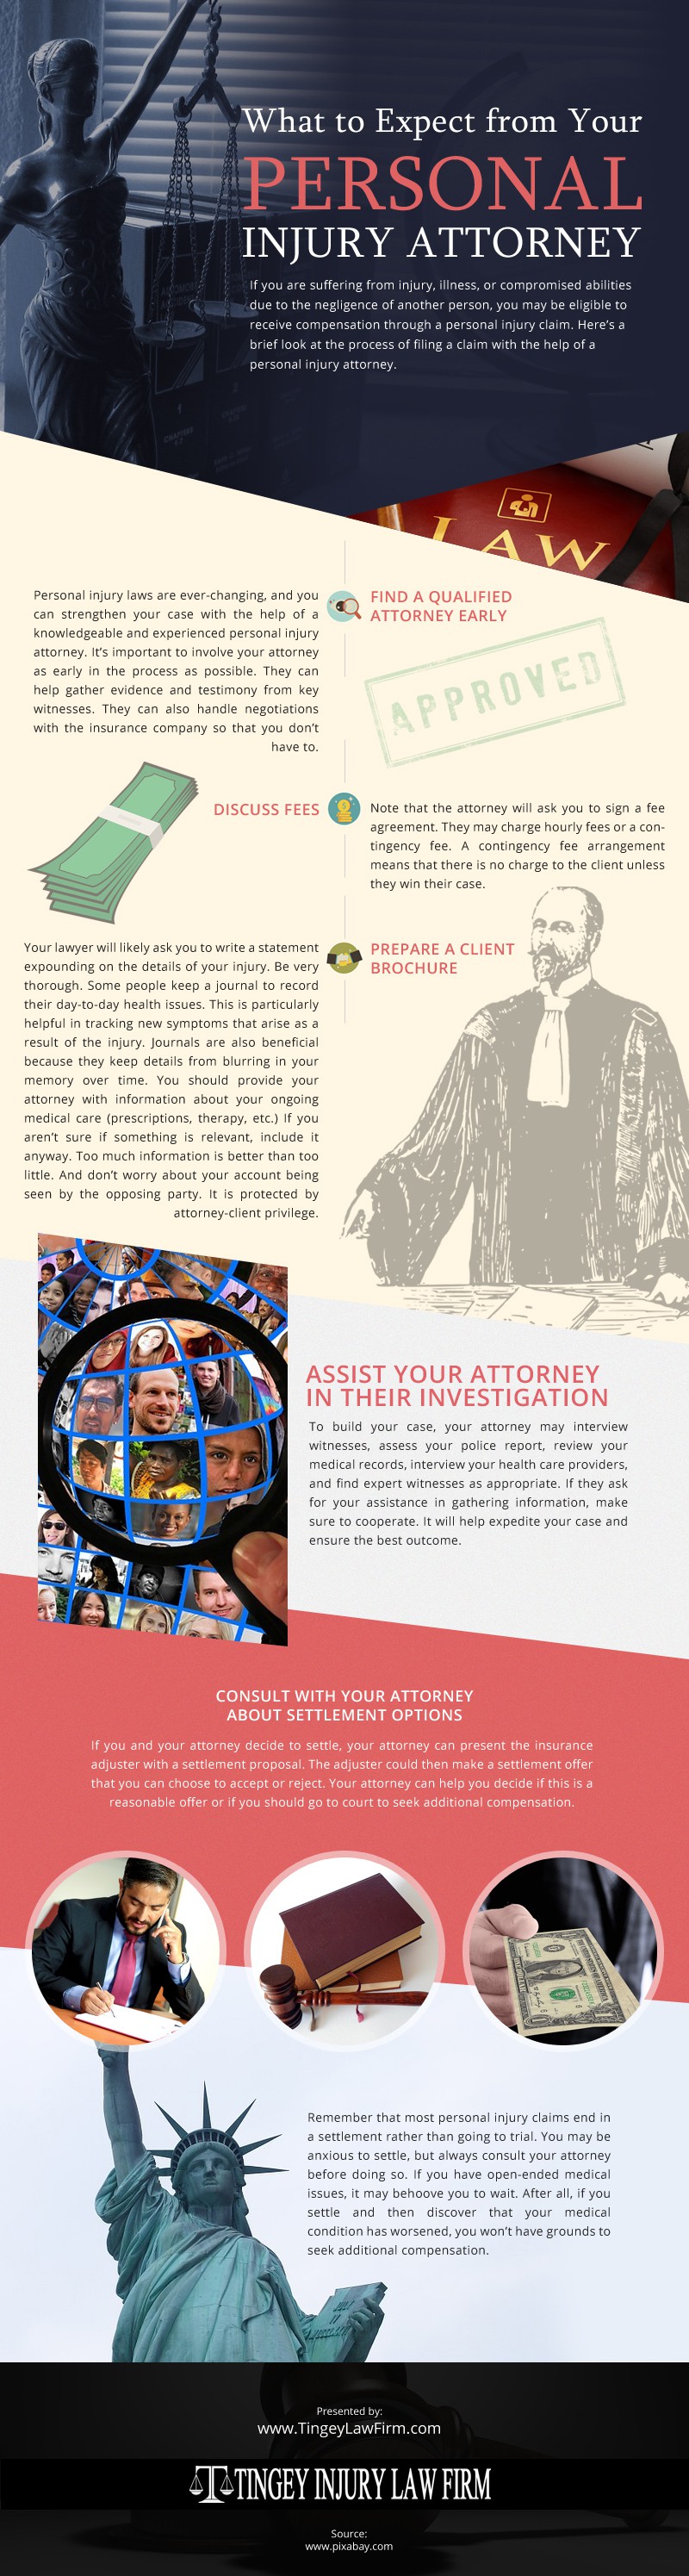 What to Expect from Your Personal Injury Attorney [infographic]